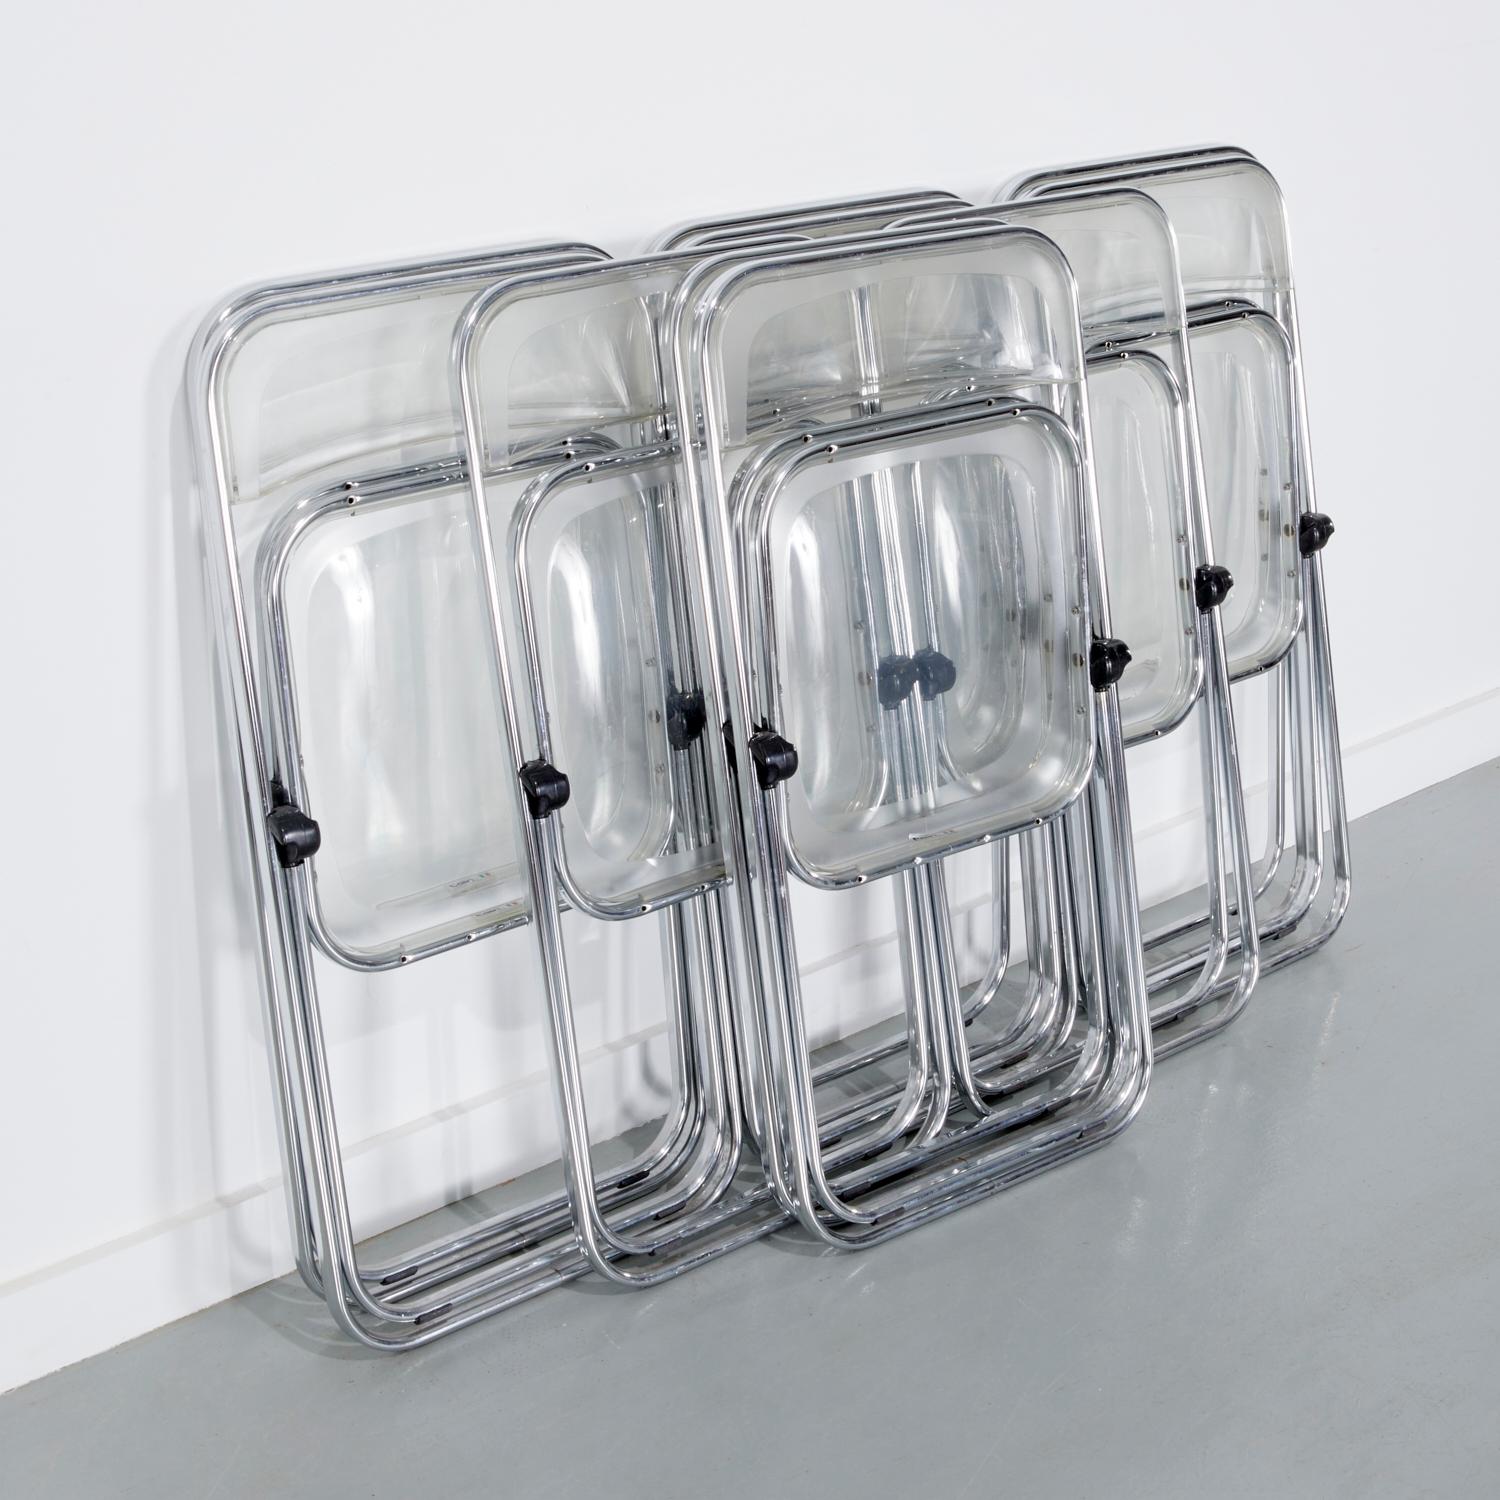 20th century, Italy, a set of ten (10) chrome and acrylic folding chairs with Talin sticker label. In addition to folding, these chairs can be stacked for ease of storage. The chair design is both slim and sleek and is certainly a stylish option